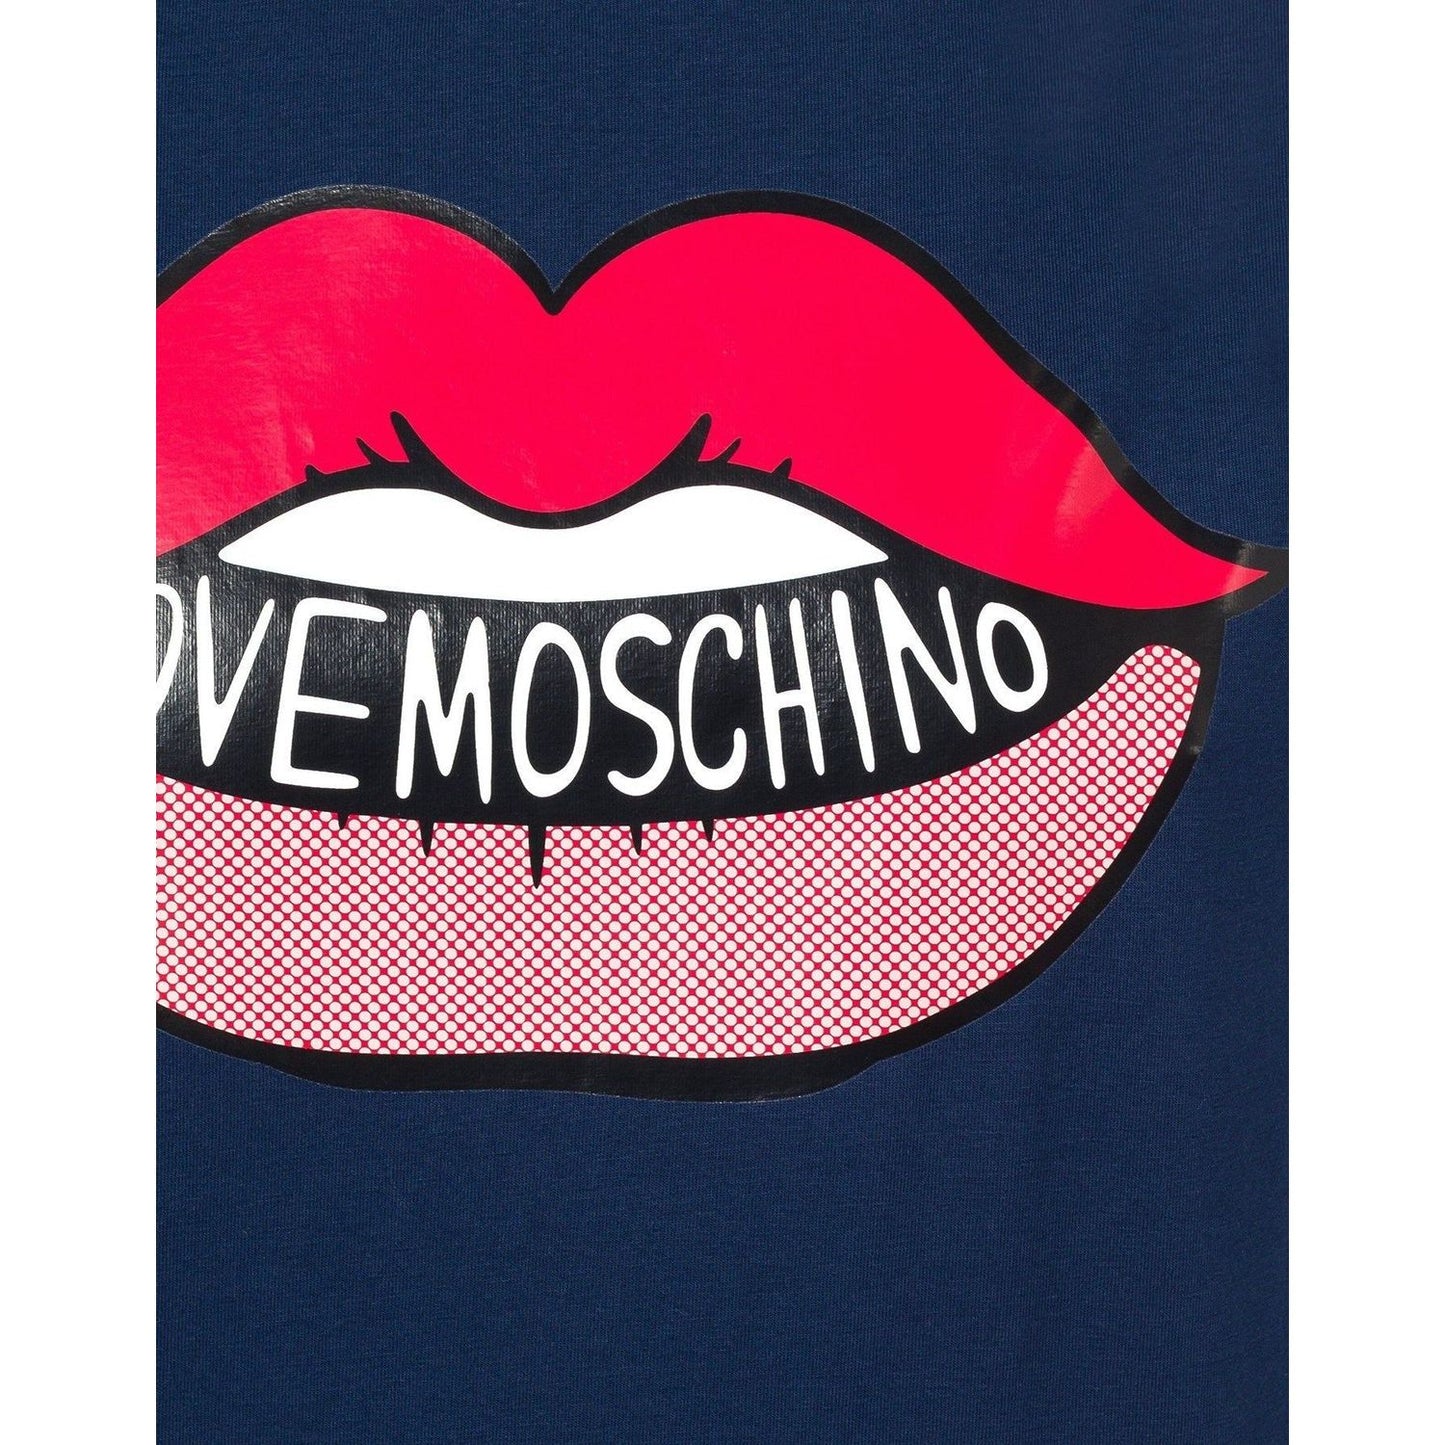 Love Moschino Graphic Lips Jersey Tee in Navy Blue blue-cotton-tops-t-shirt-6